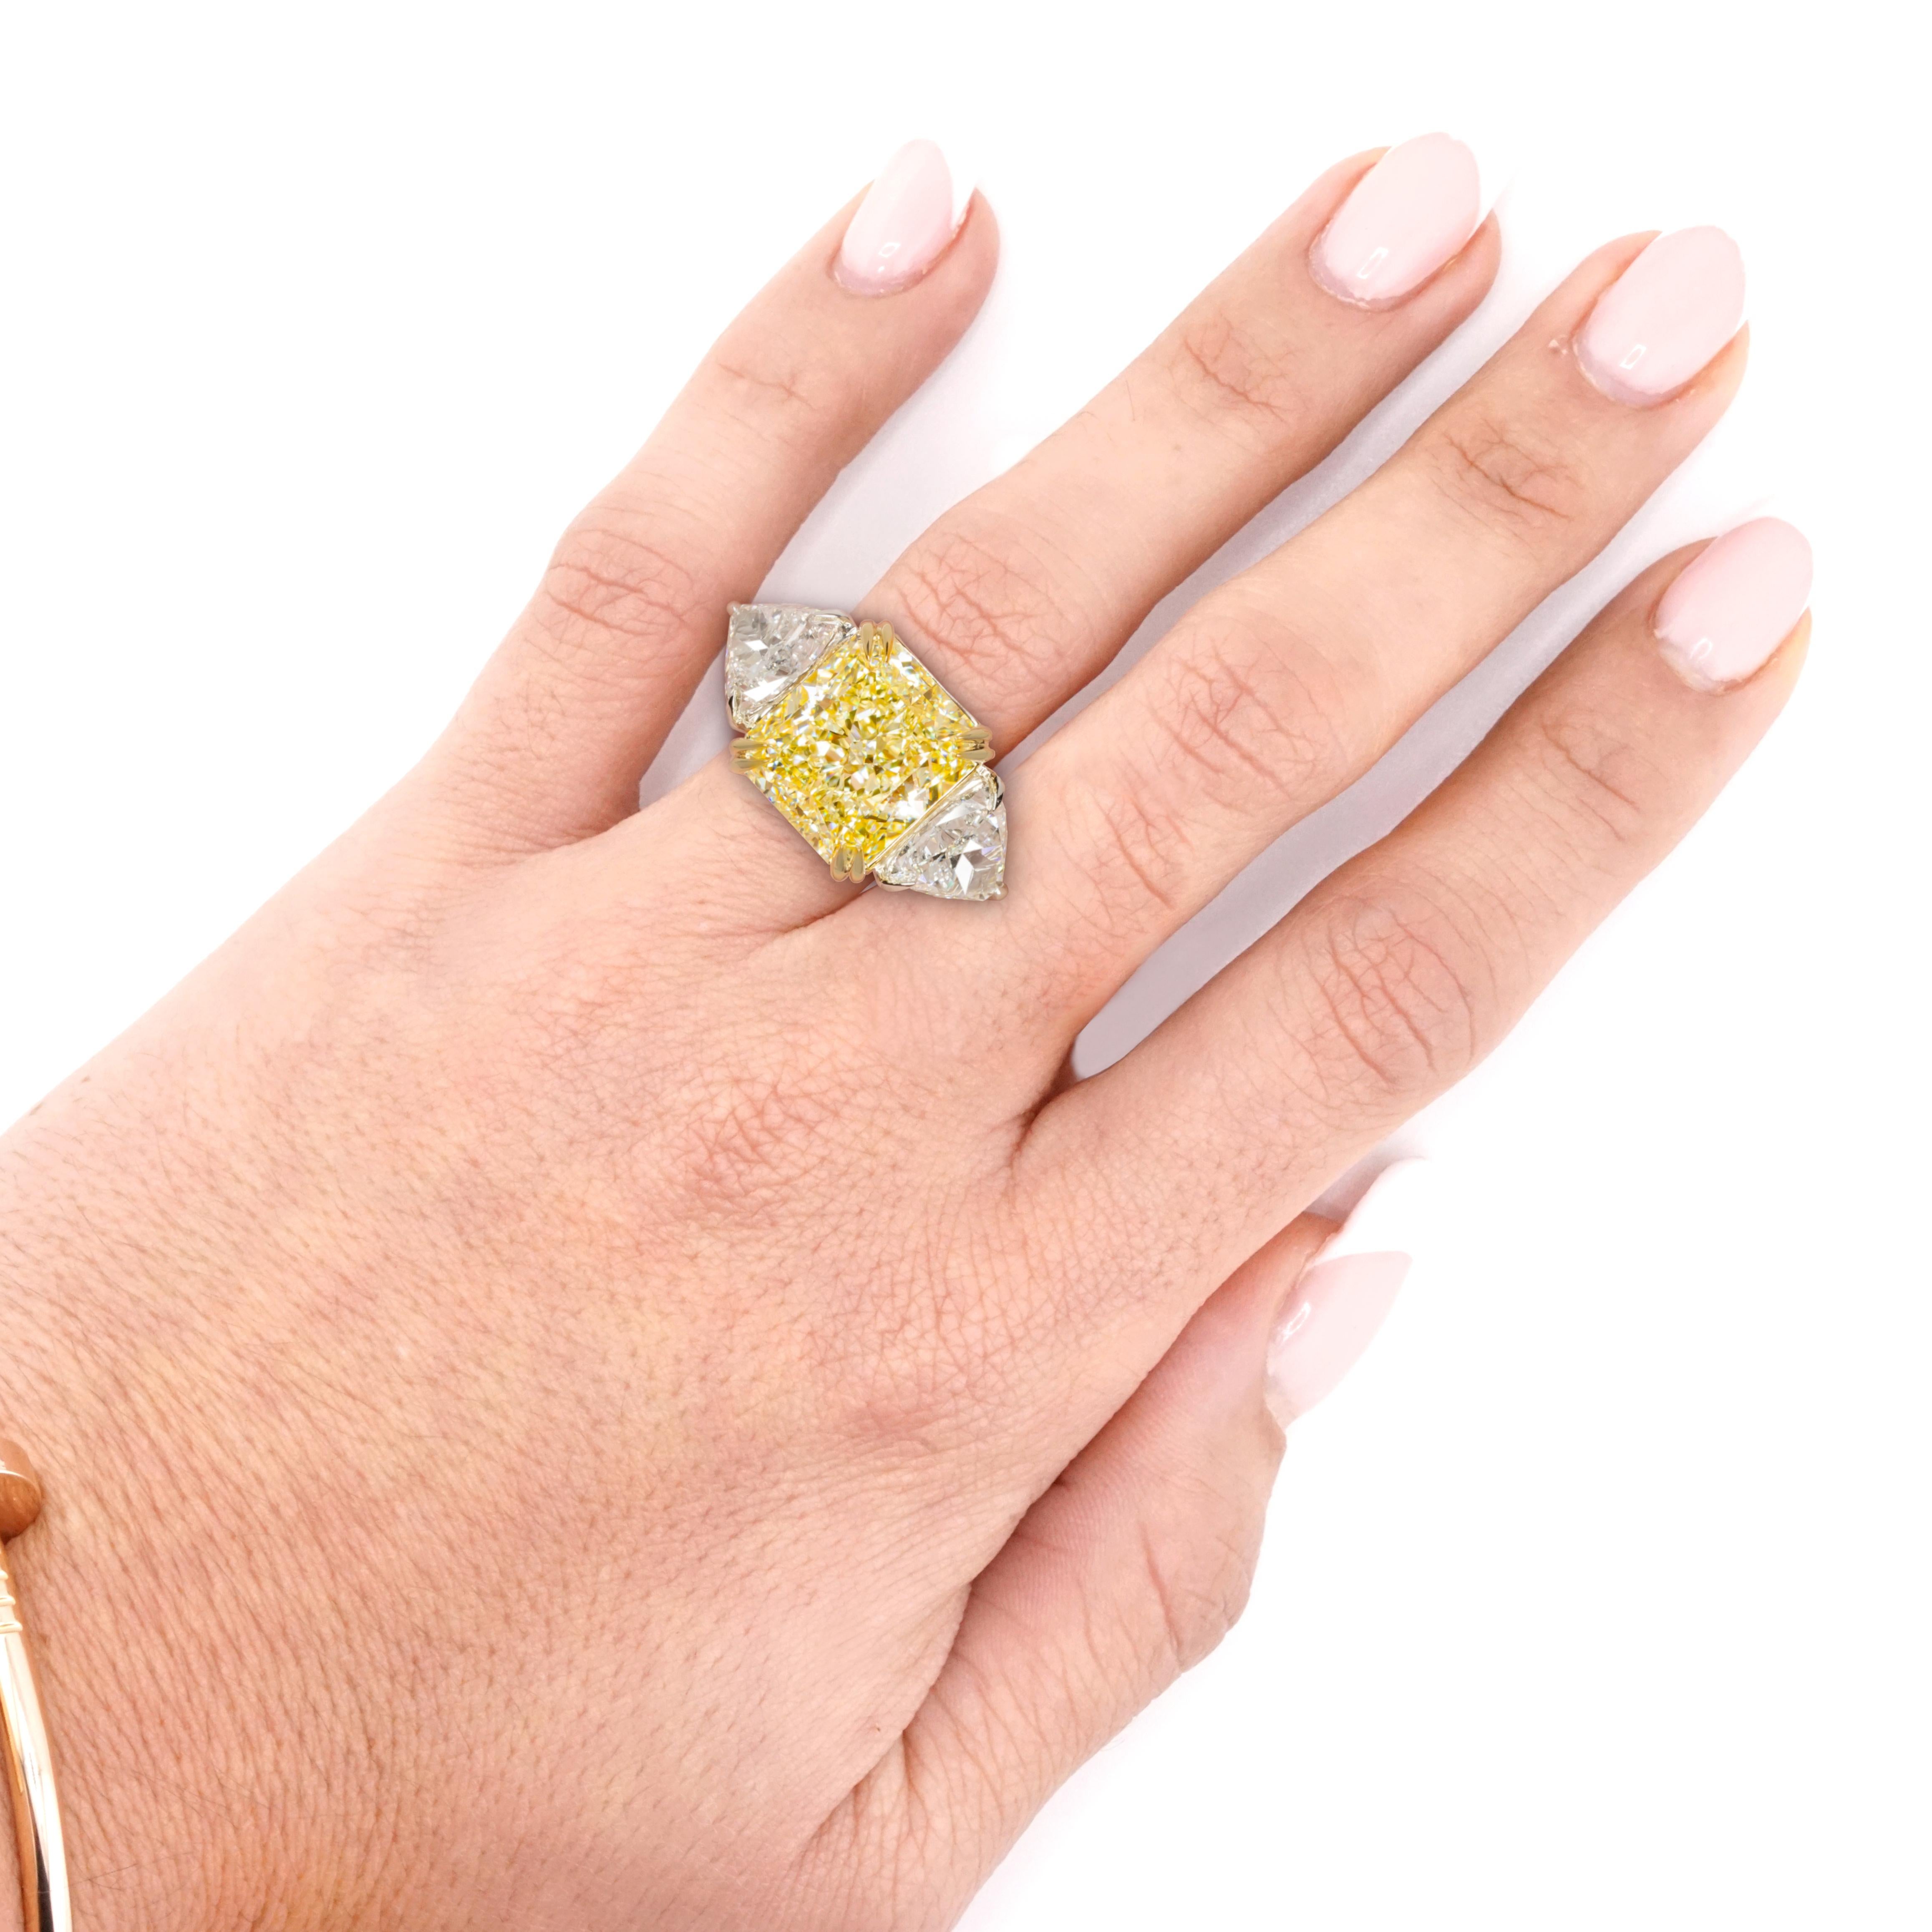 EXCEPTIONAL GIA Certified 8 Carat VVS2 Fancy Yellow Diamond Ring For Sale 1